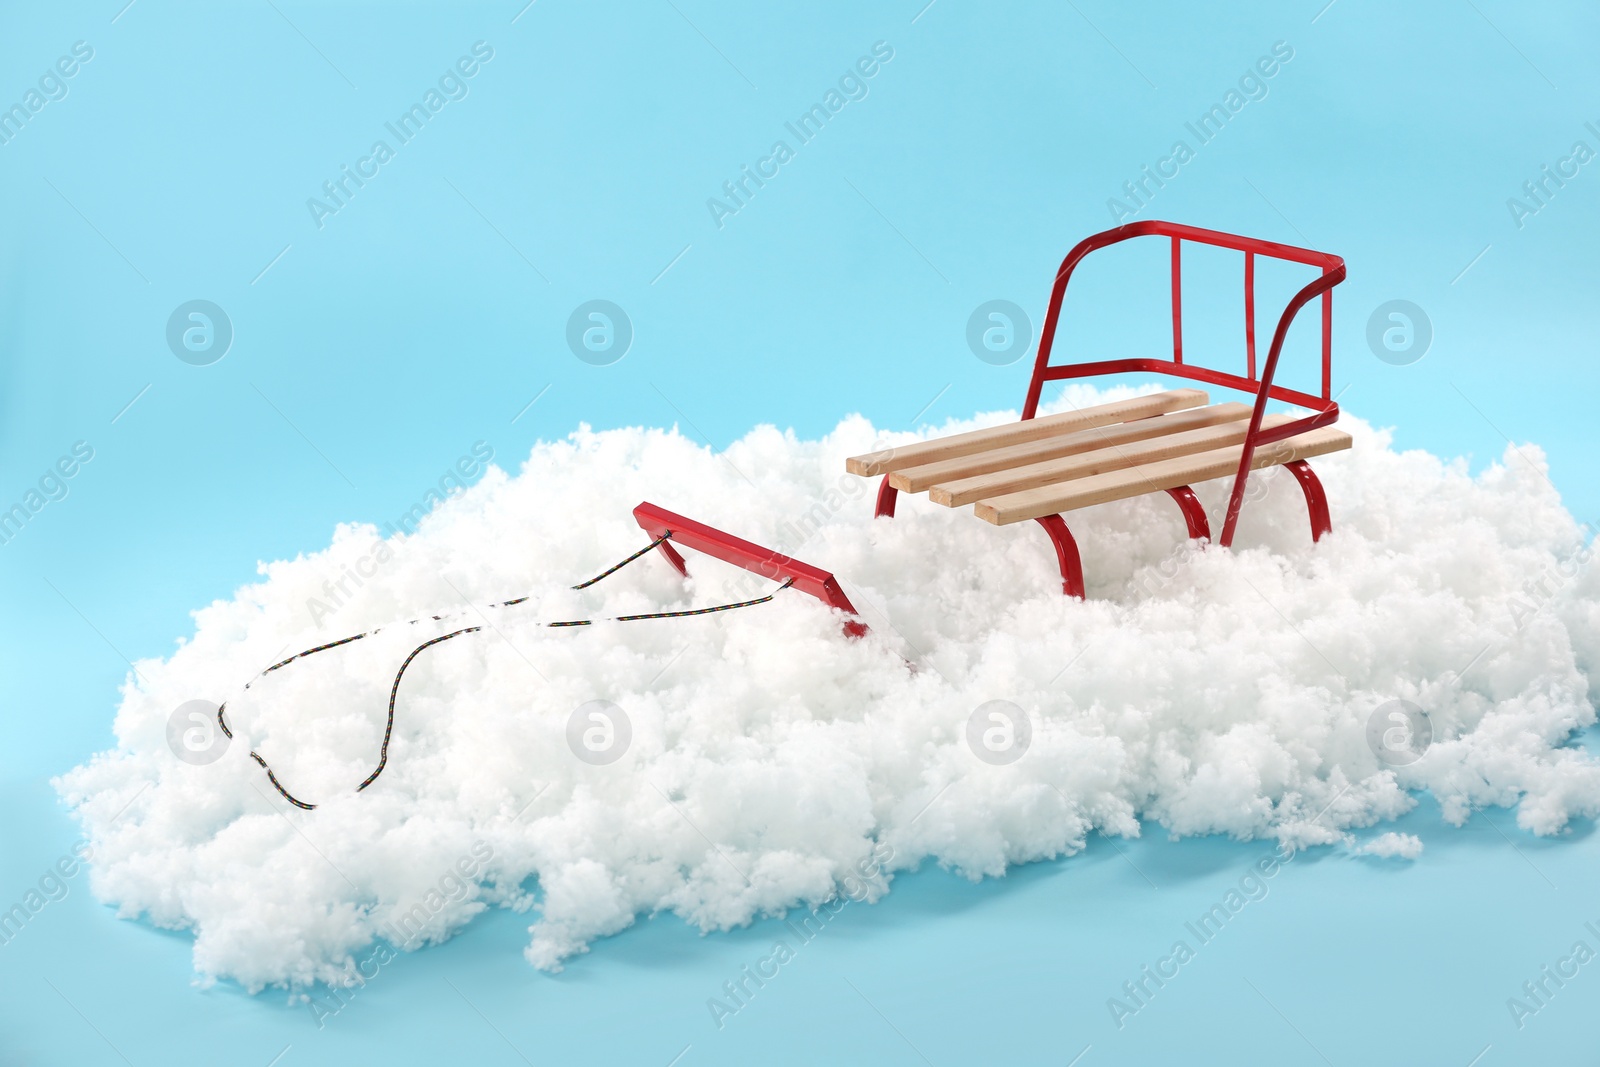 Photo of Empty sleigh in artificial snow on light blue background. Winter activity